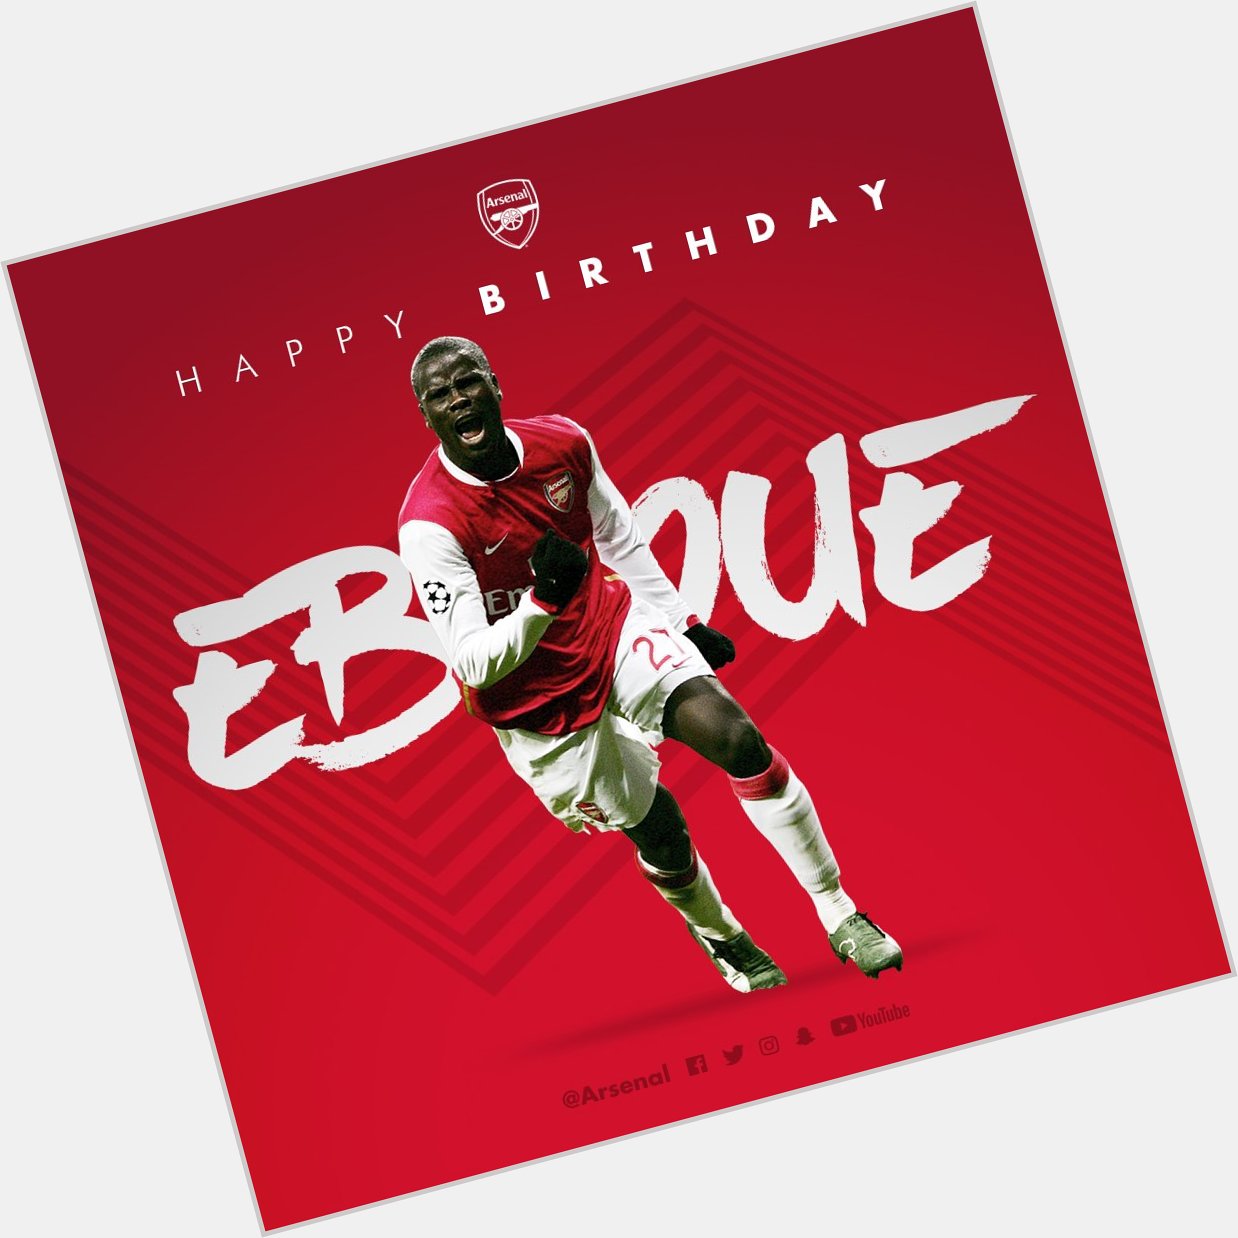  Happy 35th birthday to you, Emmanuel Eboue - and thanks for always putting a smile on our faces! 